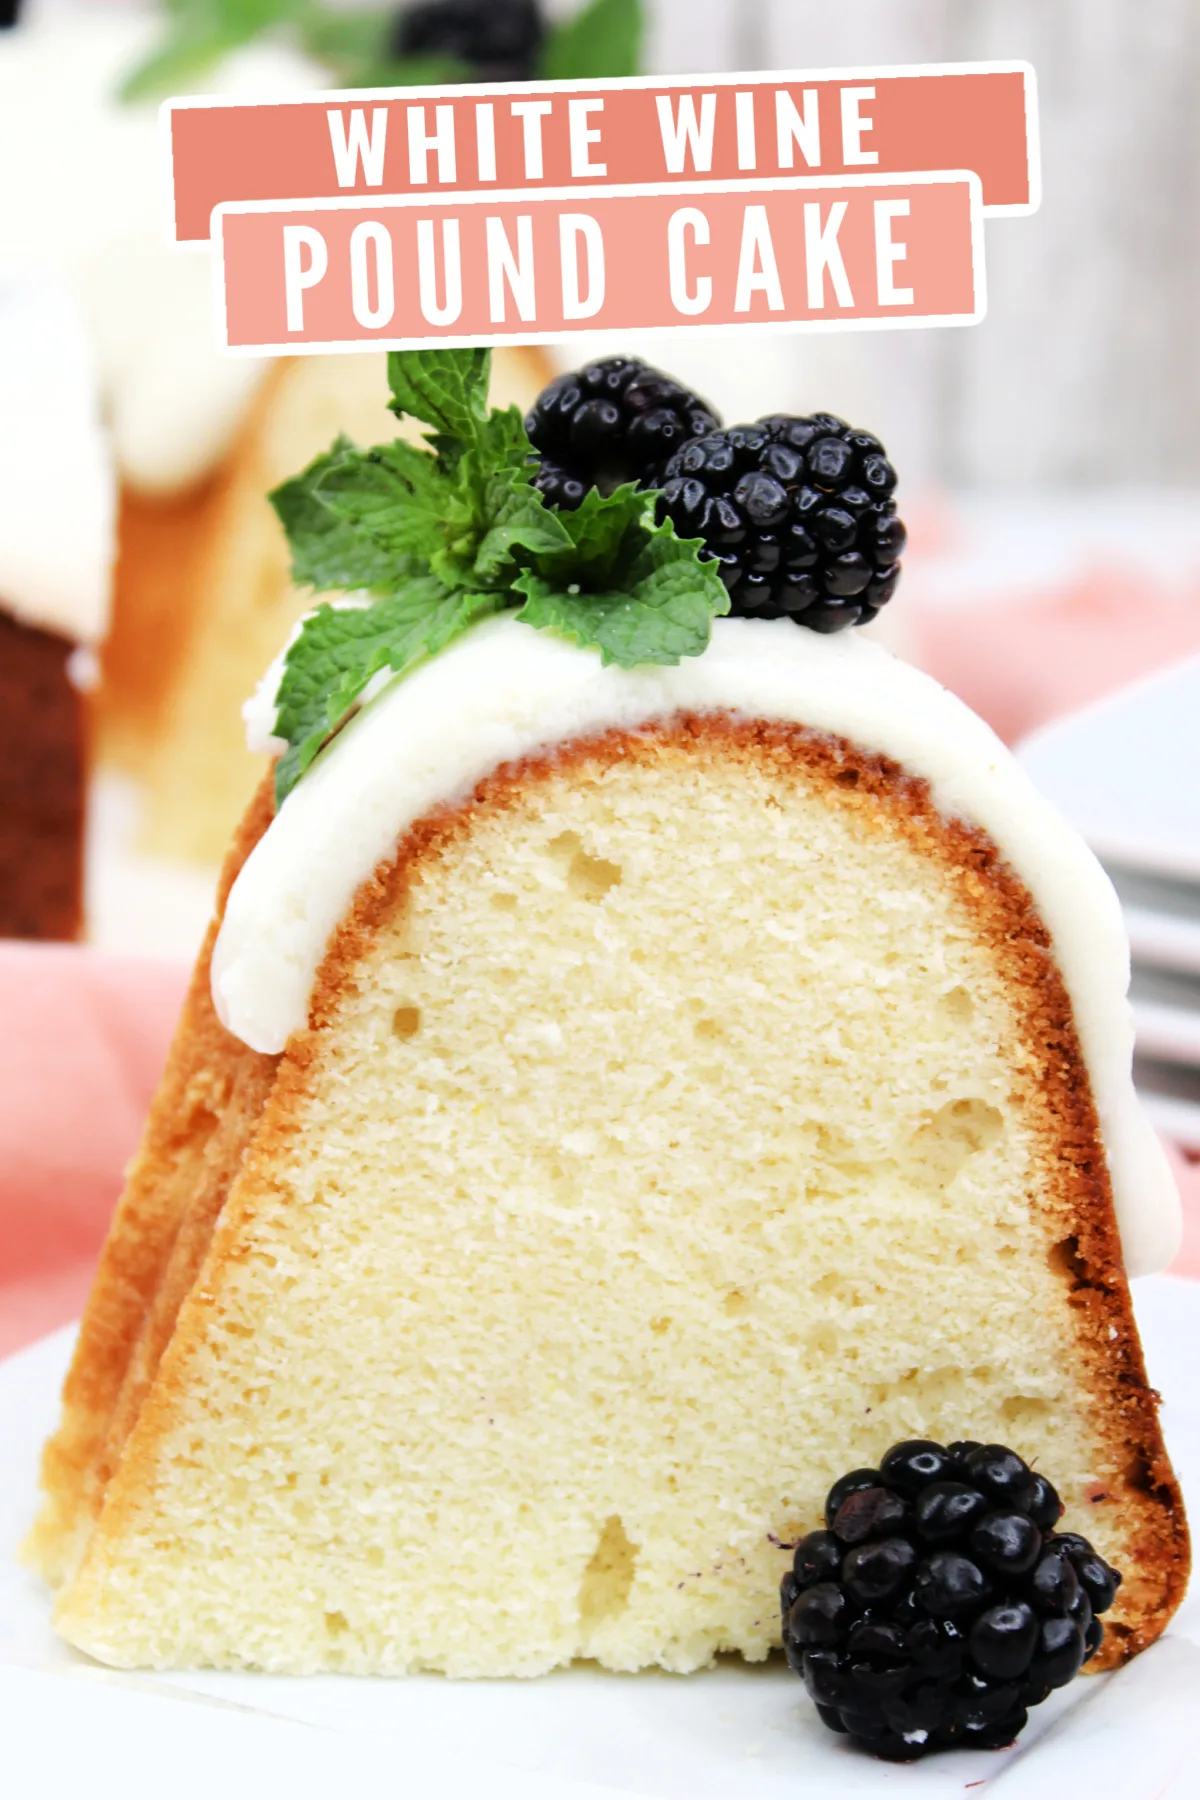 This white wine pound cake recipe is moist, fluffy, and perfectly sweet; it's a delicious dessert that everyone will love.